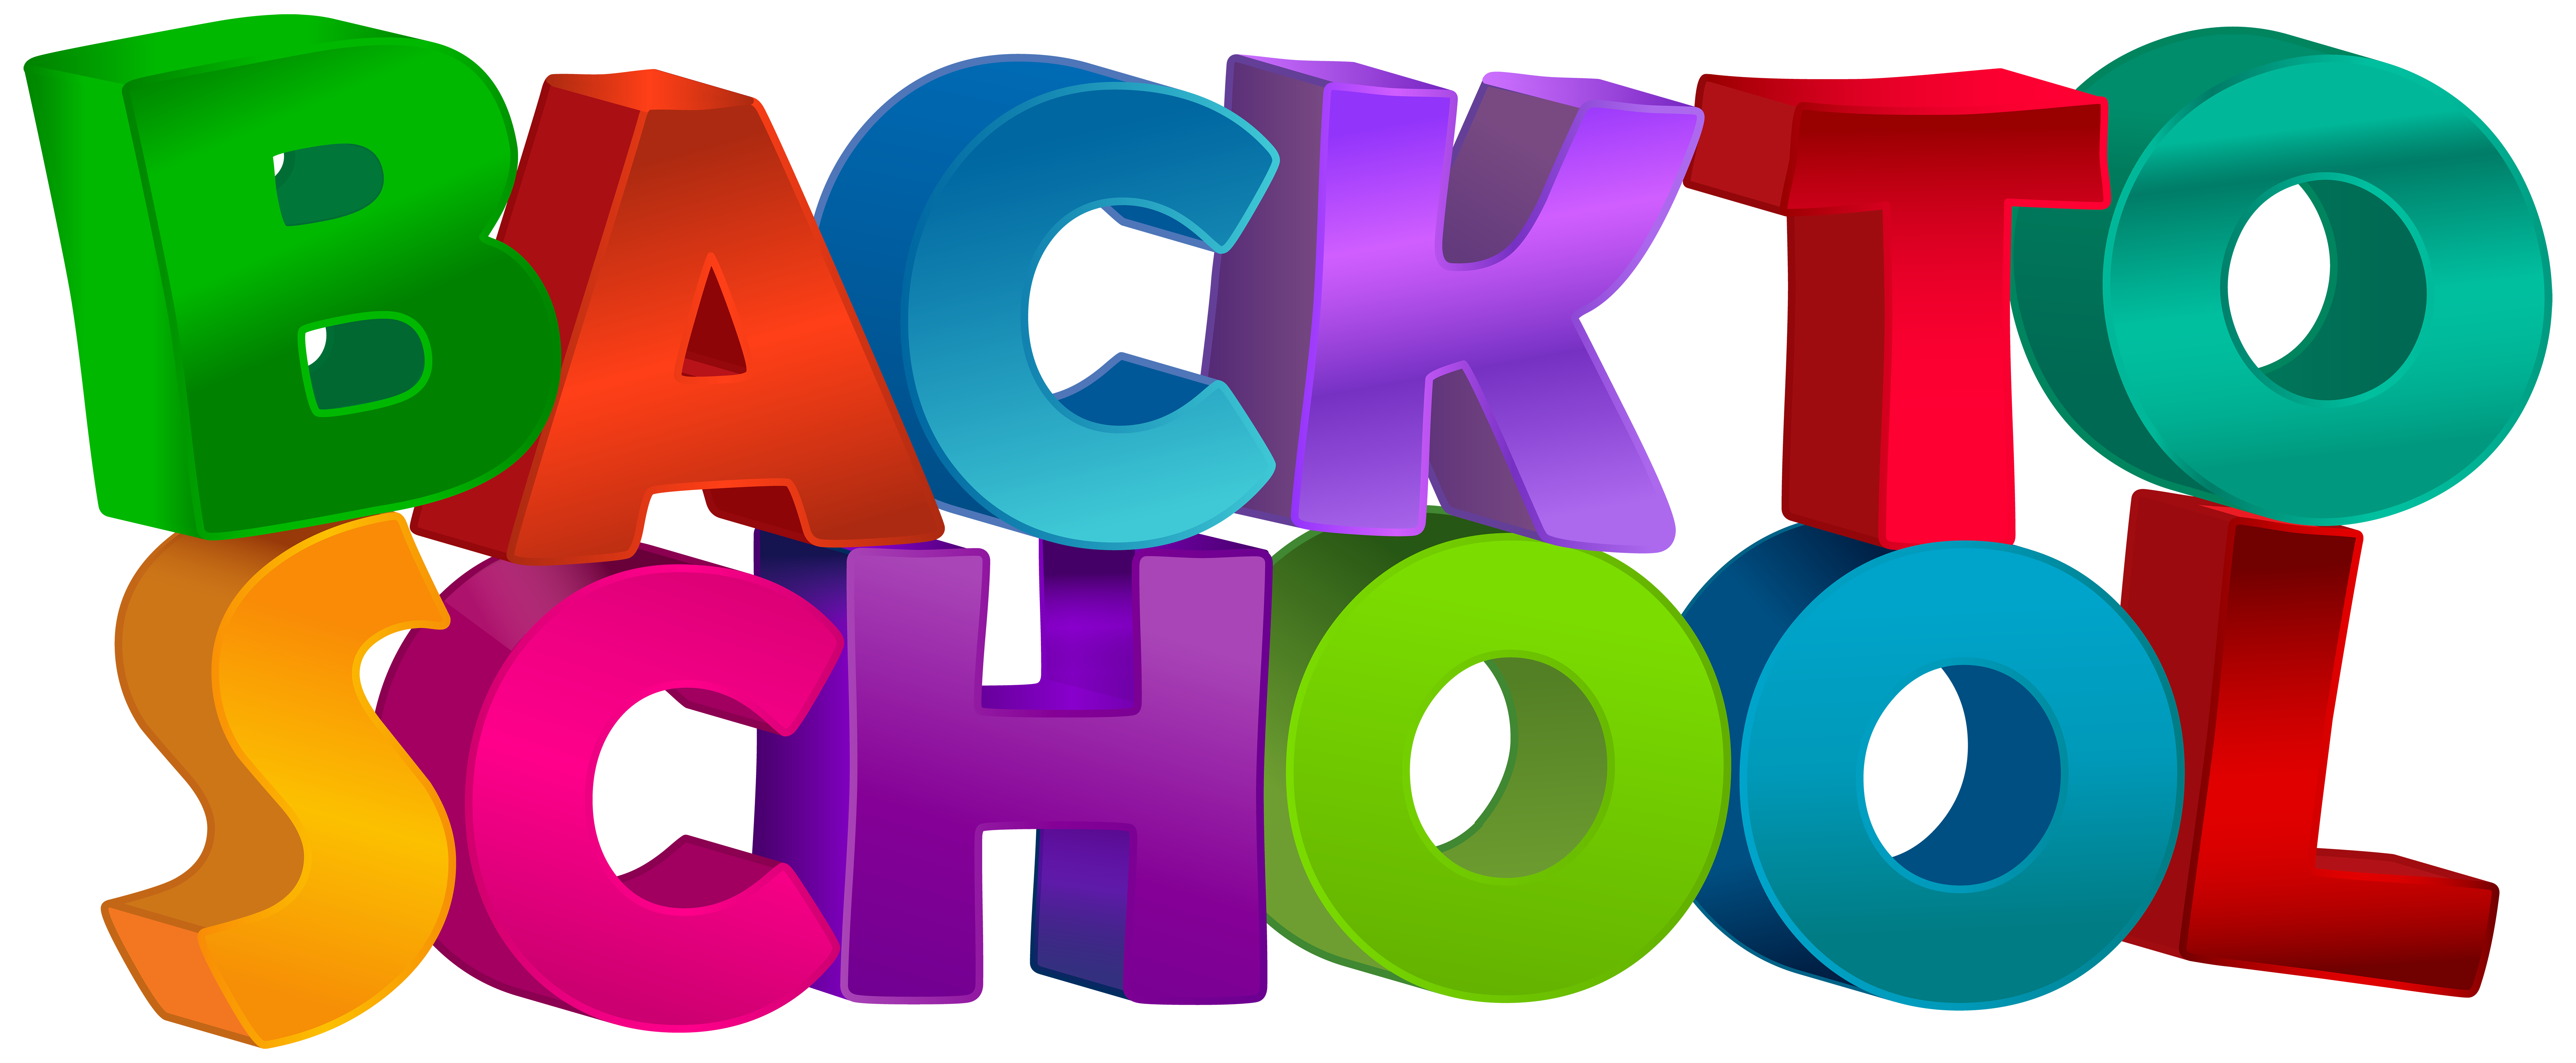 clipart of back to school - photo #25